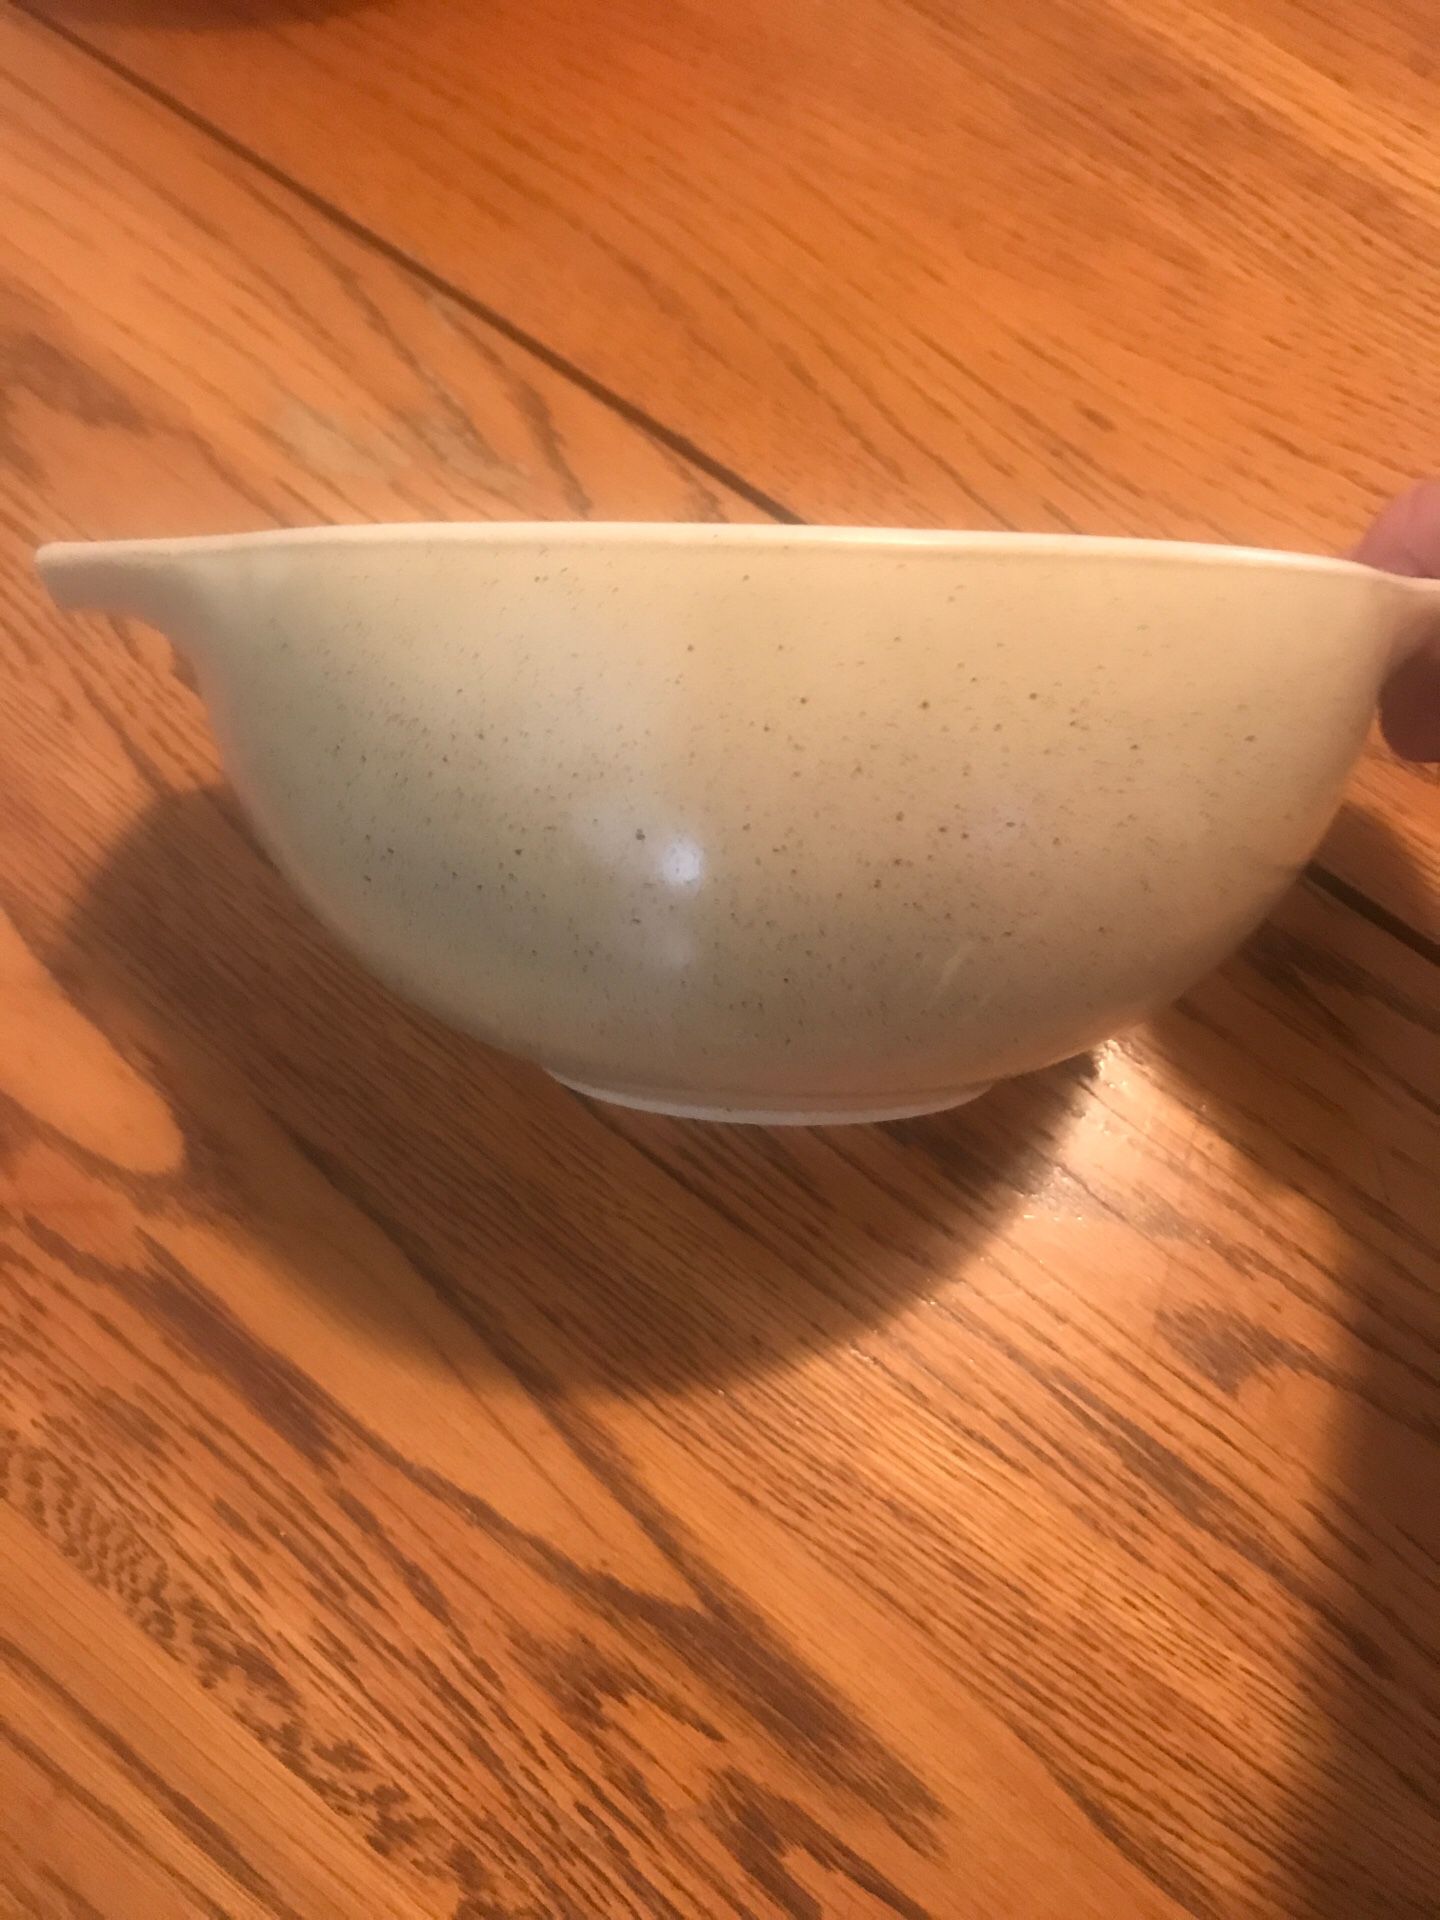 3 Pyrex bowls. Nice shape. The brown one has a couple of tiny scratches.